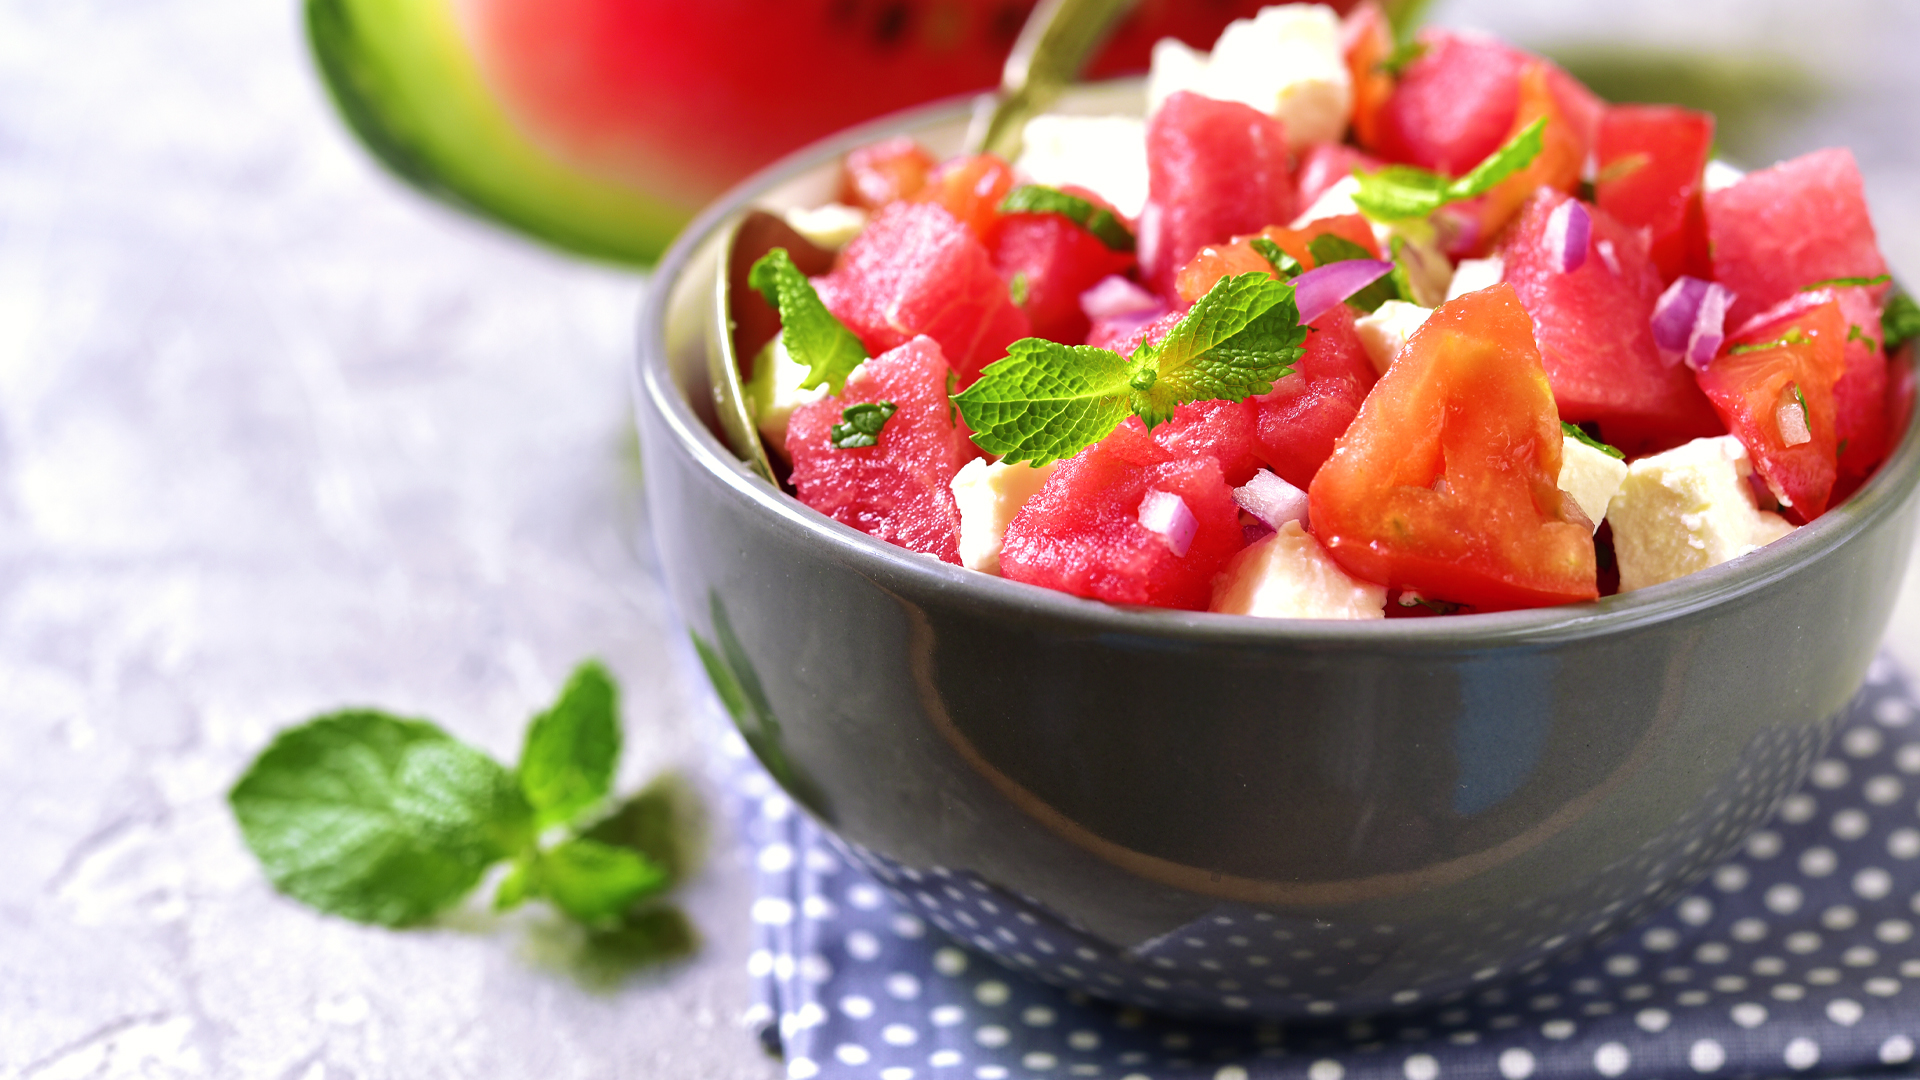 A Recipe for Summer: Watermelon Salad with Feta & Mint